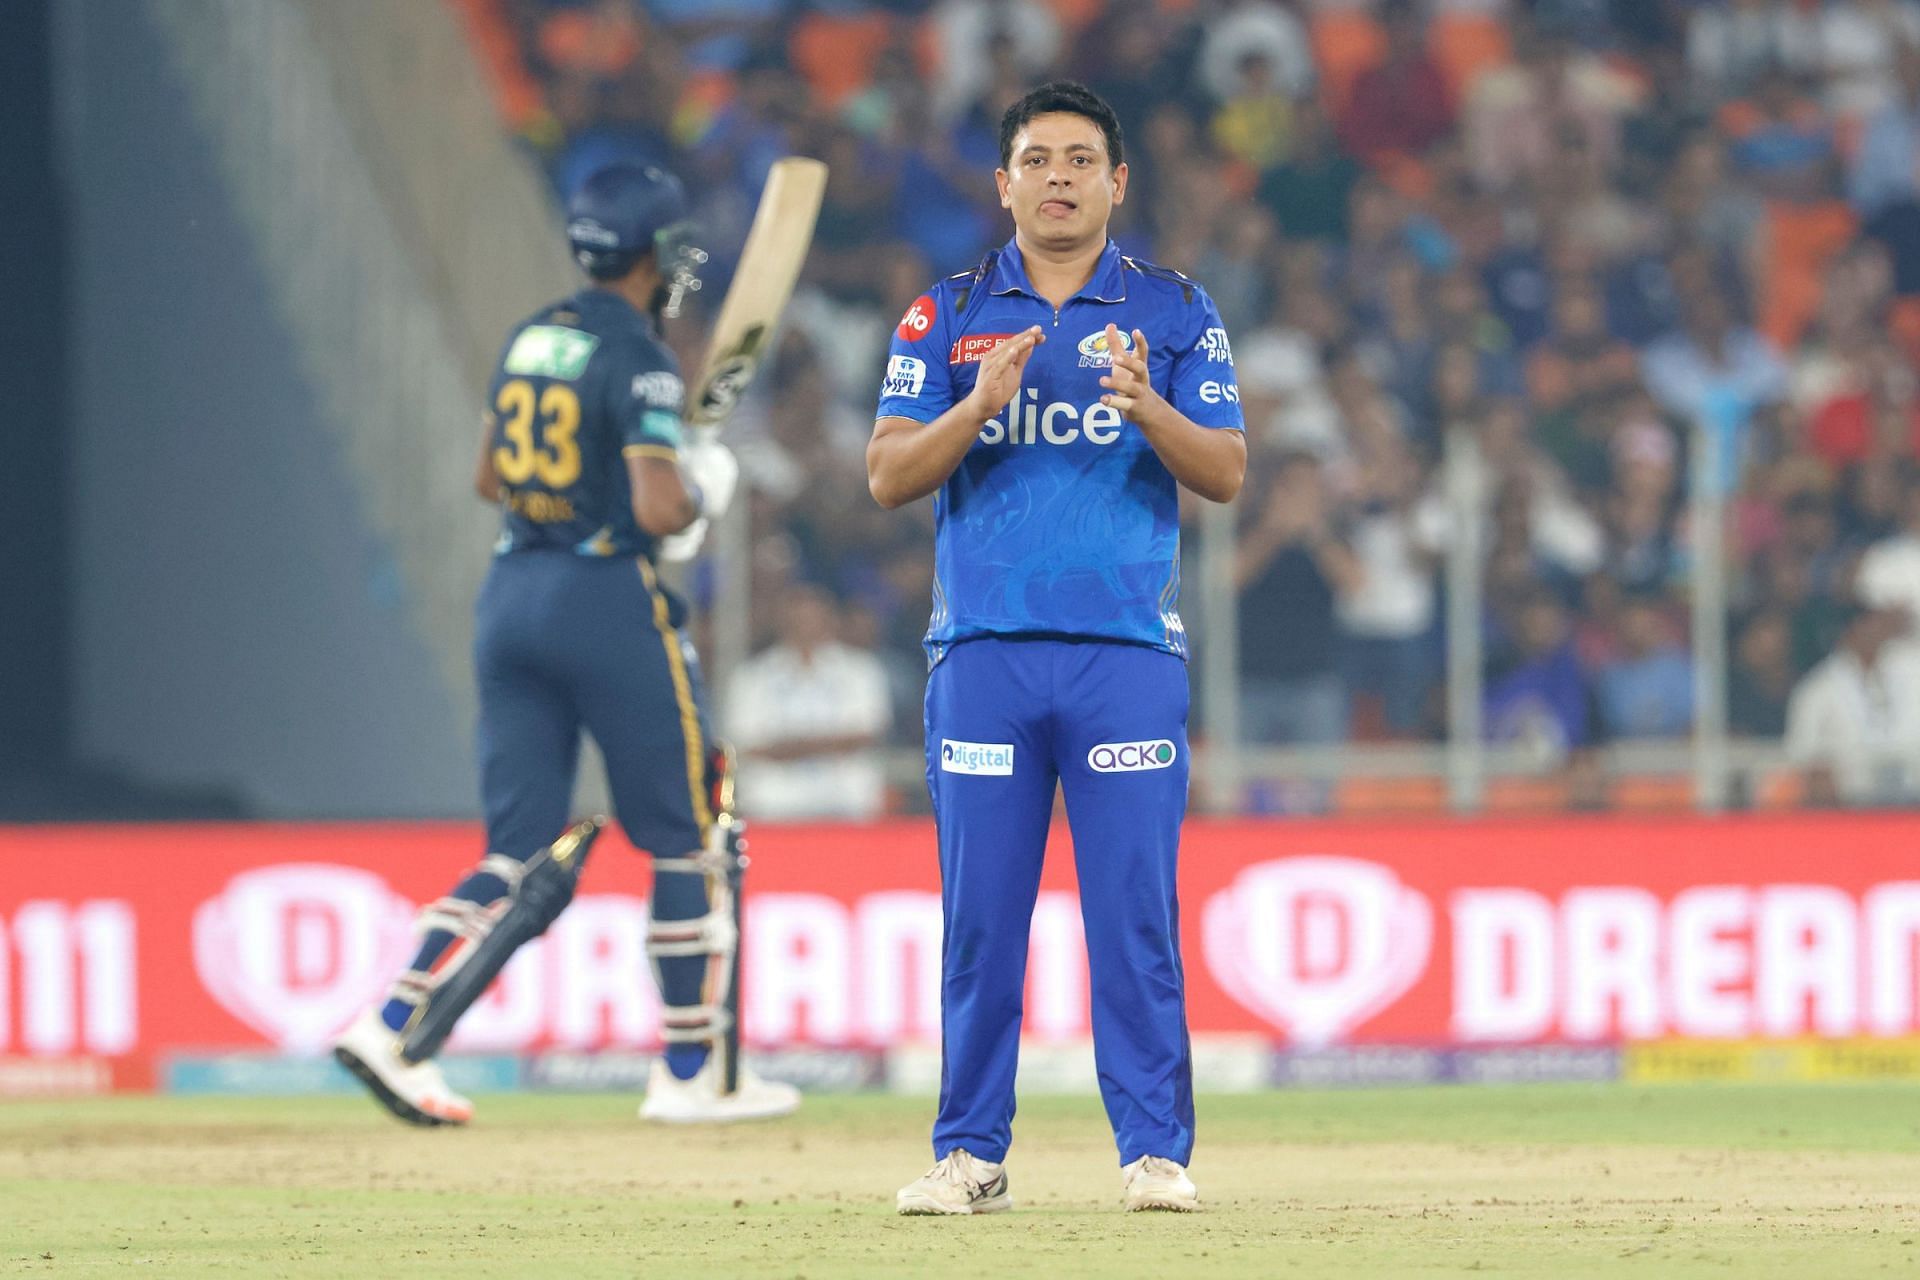 Piyush Chawla has been brilliant with the ball for MI (Image Courtesy: Twitter/IPL)